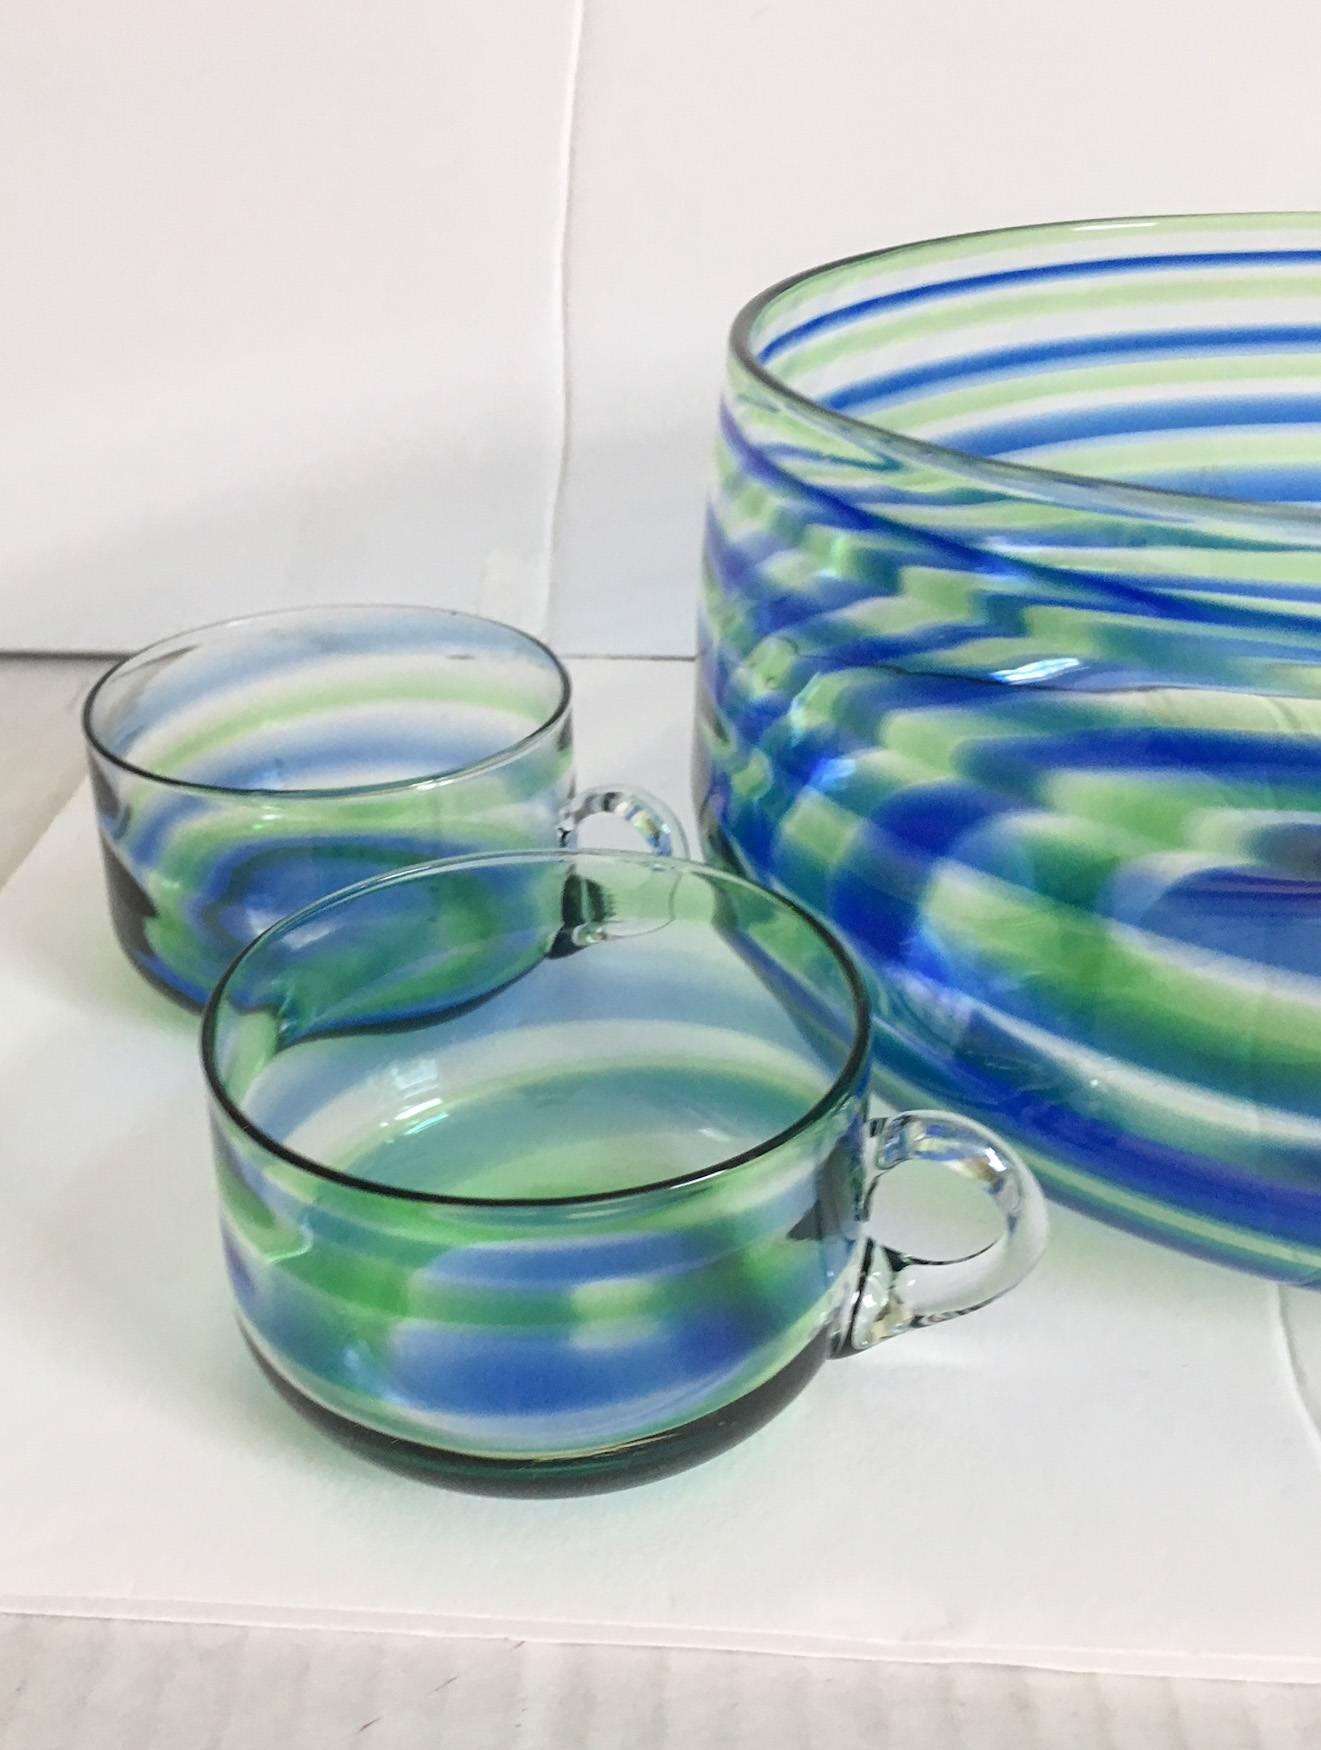 Wonderful blue, green, and clear swirled artisan glass punch bowl set with four handled cups. Bowl, 8.75